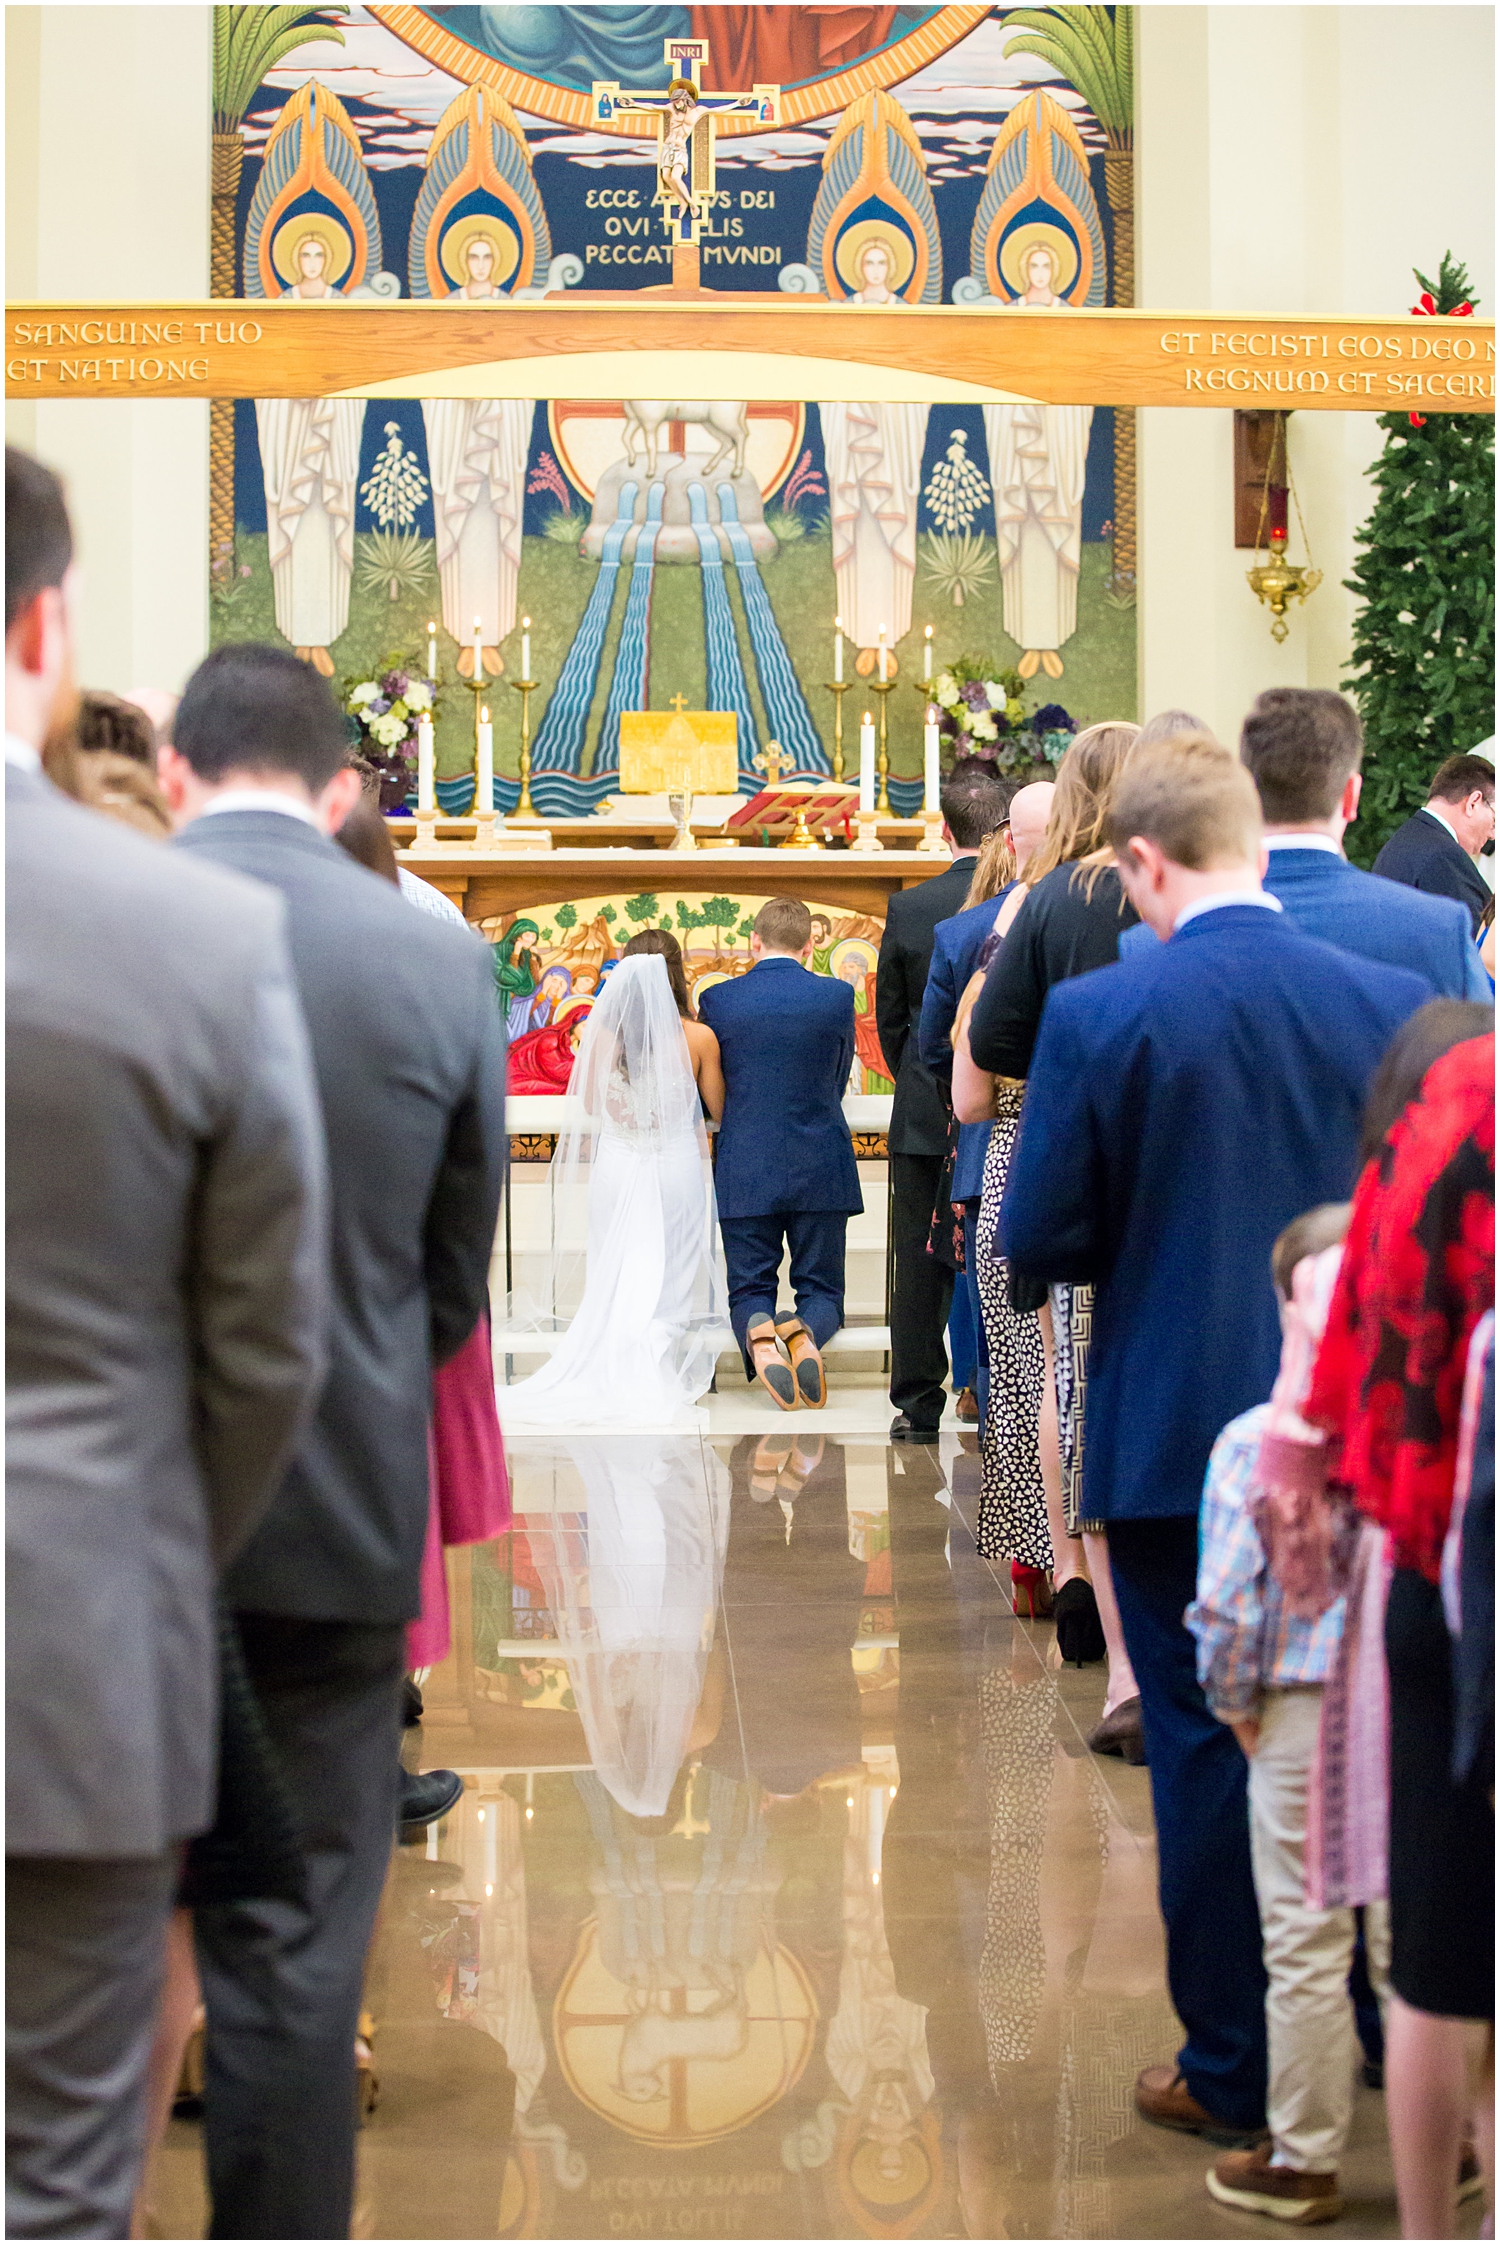 bride in demetrios bridal gown racerback with sheer beading with white hydrangeas bouquet with groom in navy blue suit with light blue tie in church wedding day